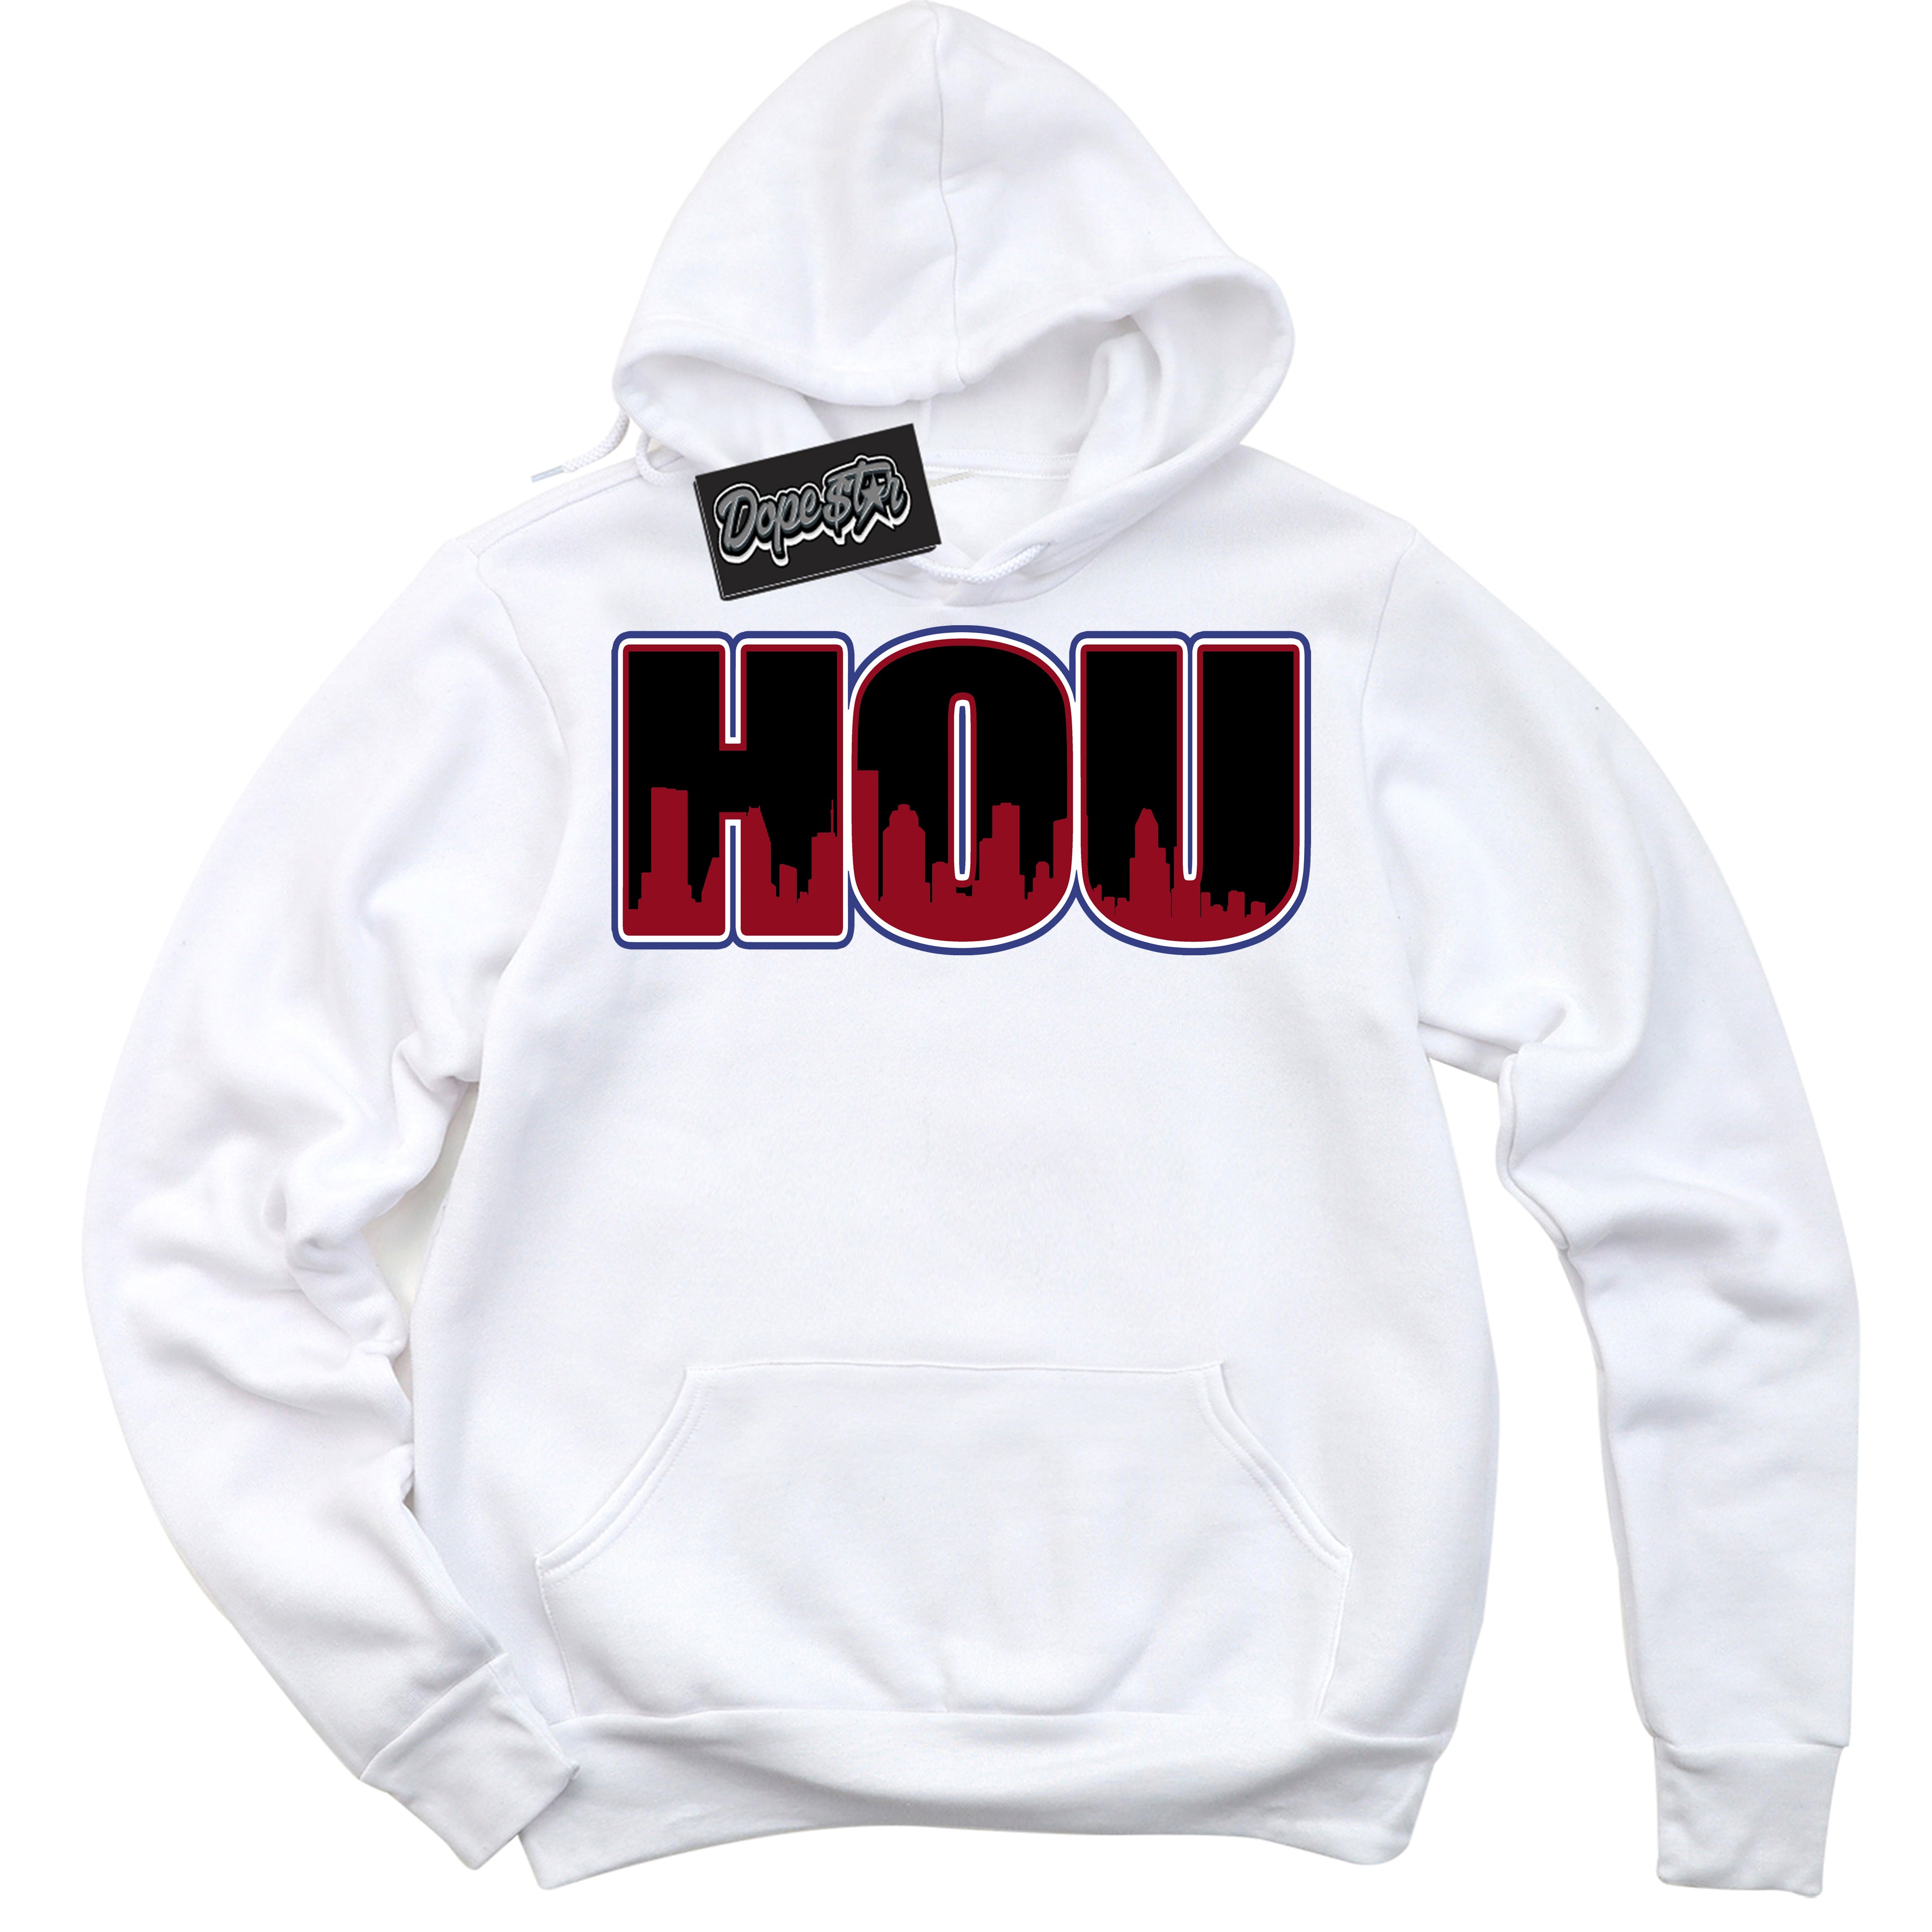 Cool White Hoodie with “ Houston ”  design that Perfectly Matches Playoffs 8s Sneakers.